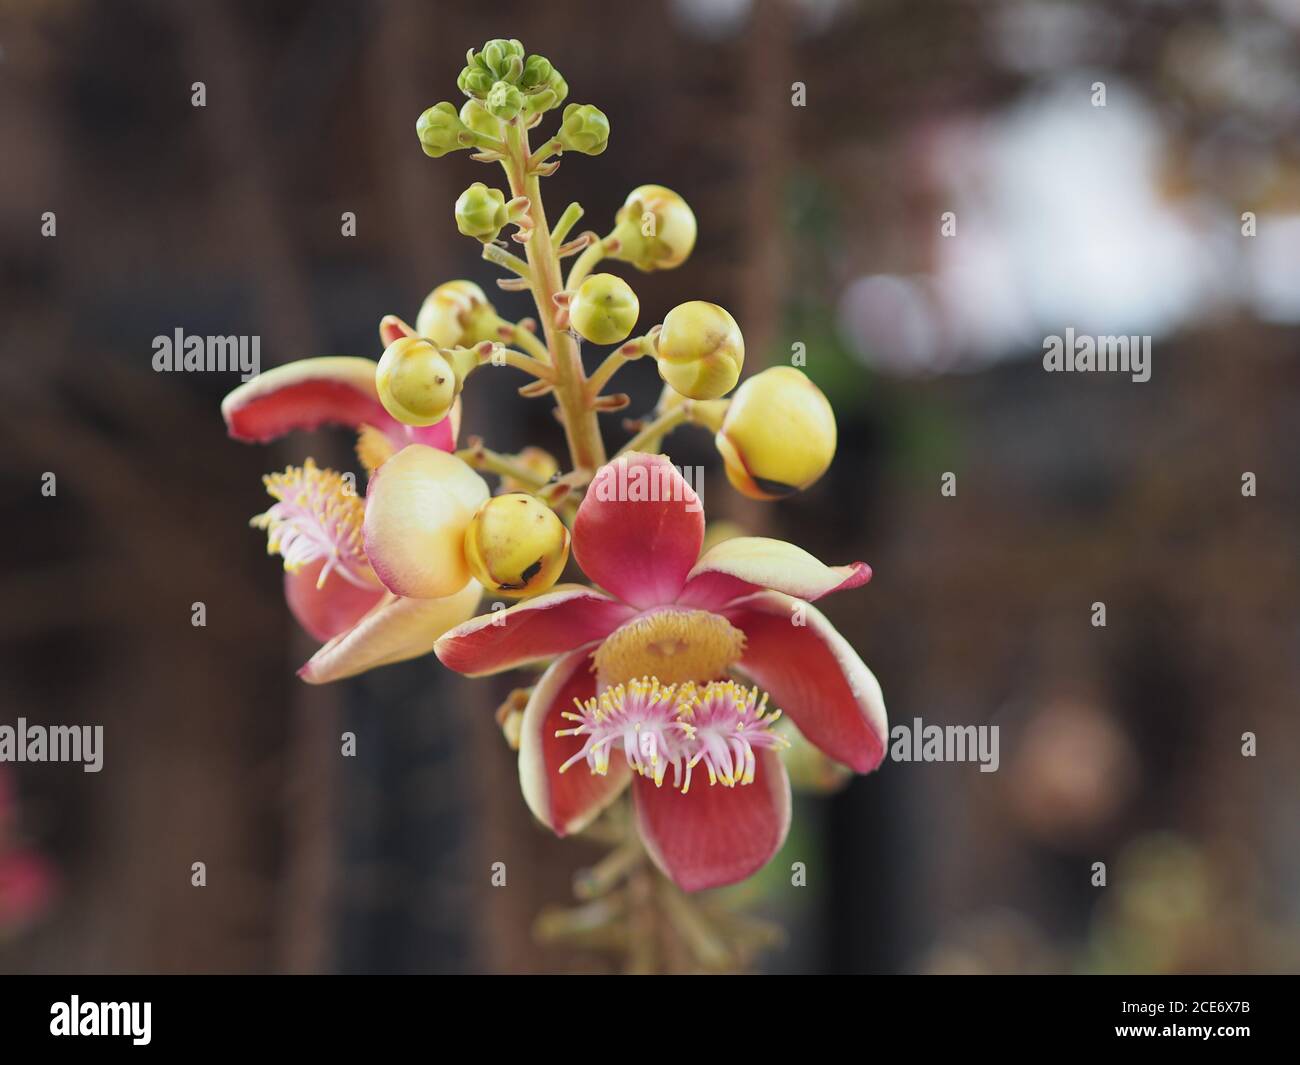 Shorea robusta, Dipterocarpaceae, Couroupita guianensis Aubl., Sal blooming in garden on blurred nature background Stock Photo